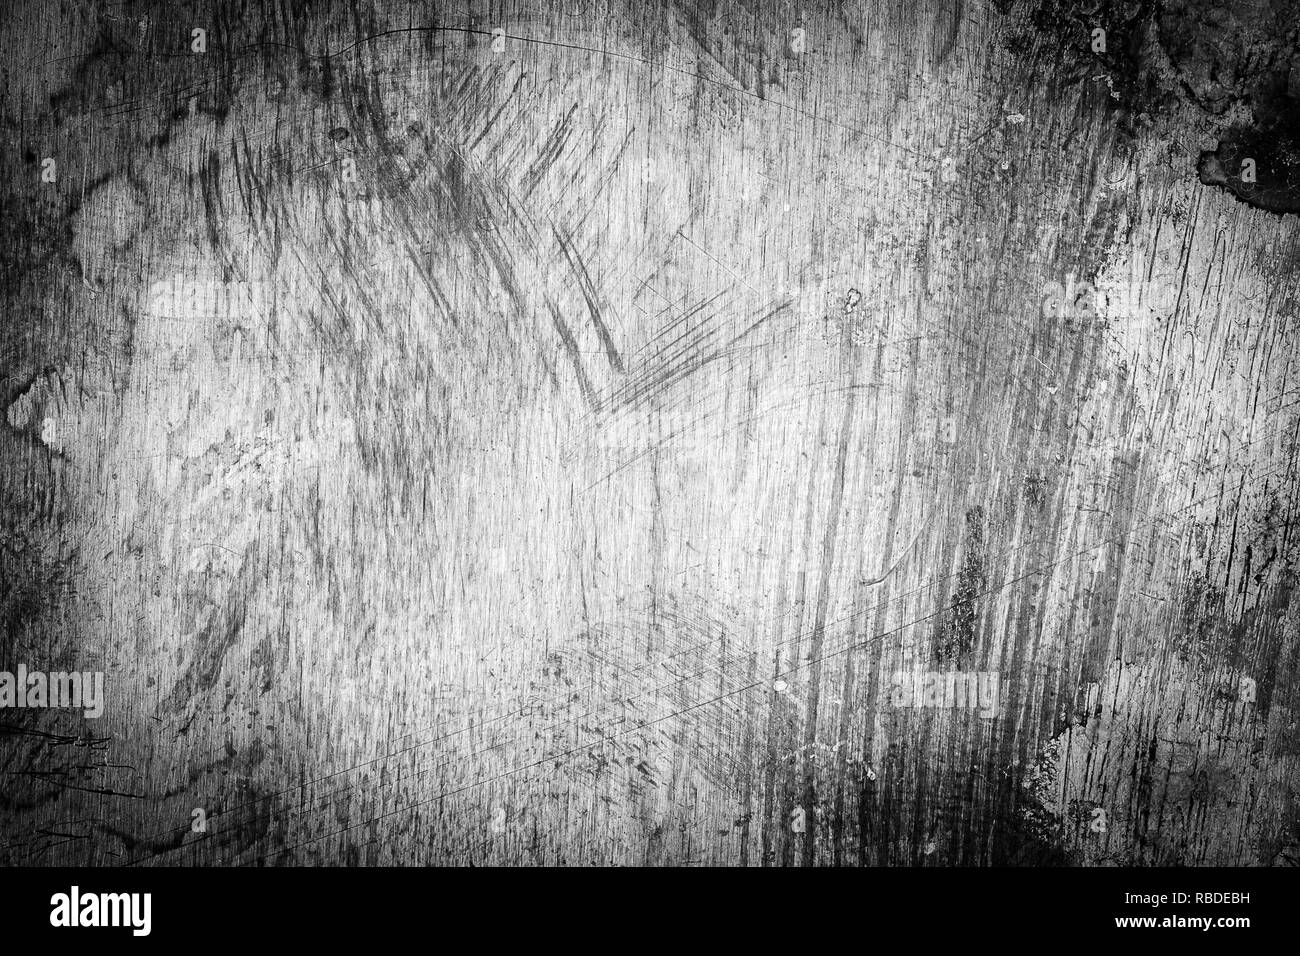 Scratched dirty dusty copper plate texture, old metal background. Cloudy and scratchy copper metal texture. Black and white image. Stock Photo